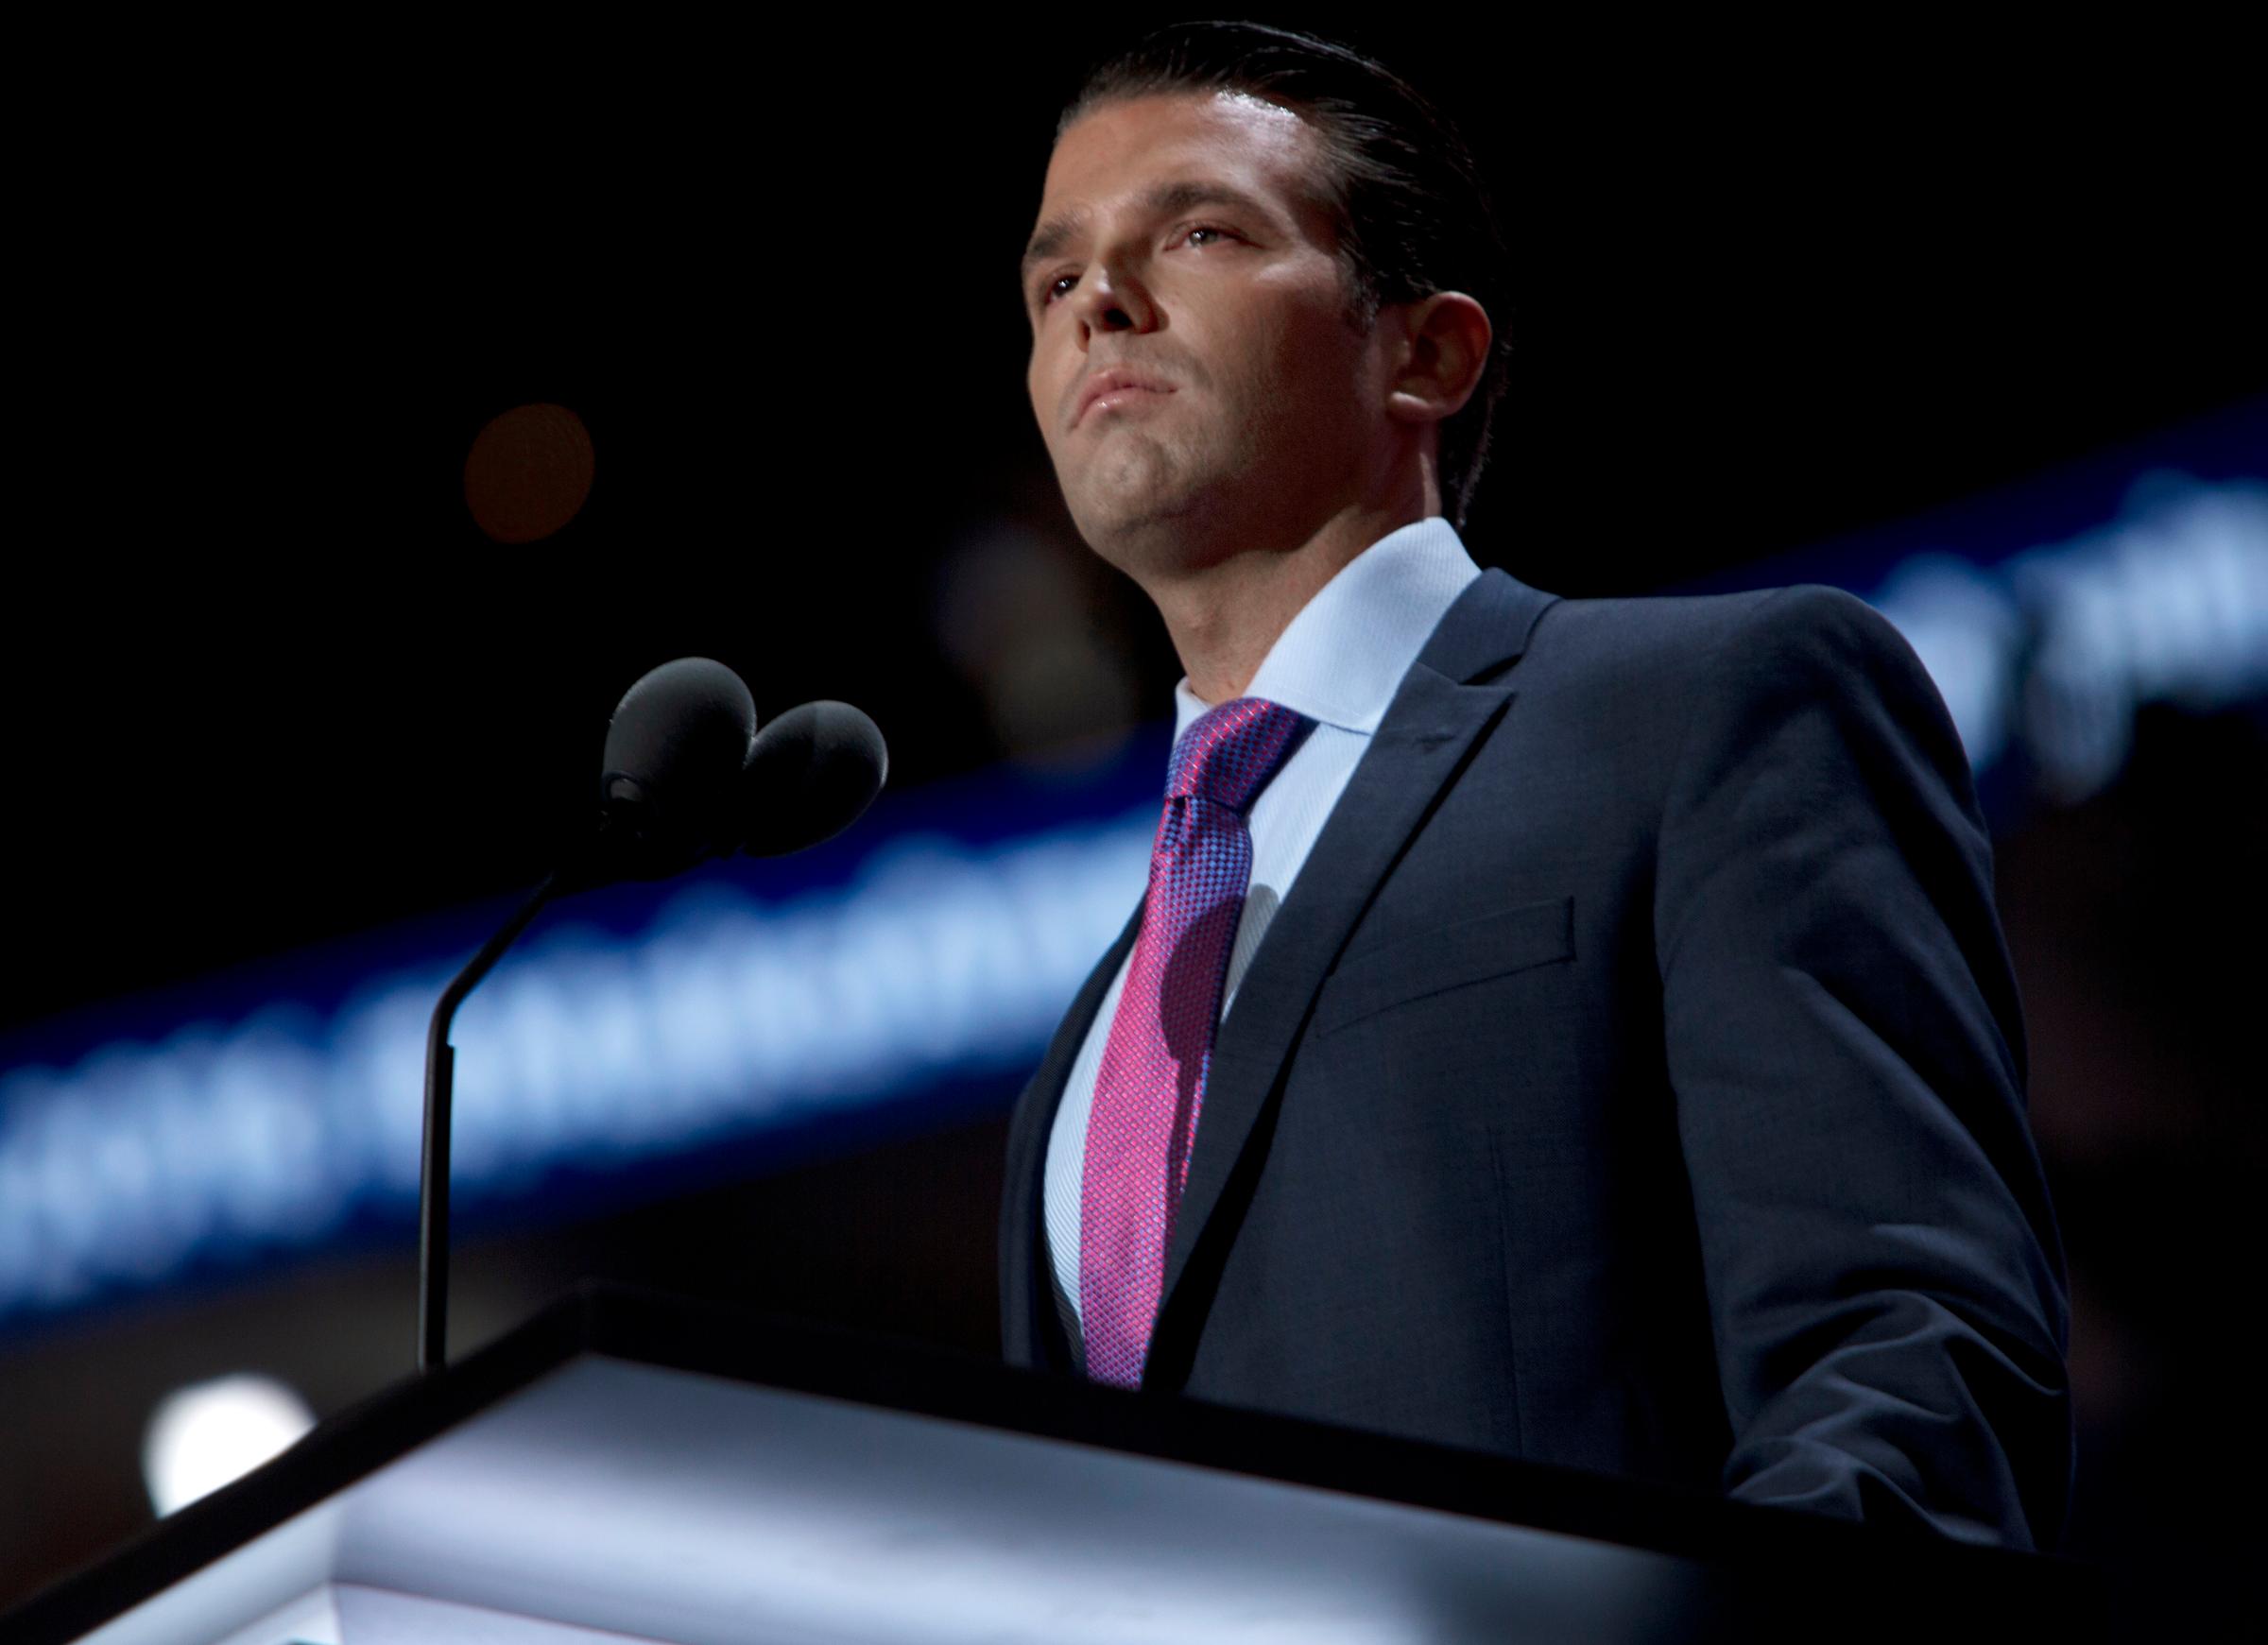 Donald Trump Jr. speaks at the Republican National Convention in Cleveland on July 19, 2016.